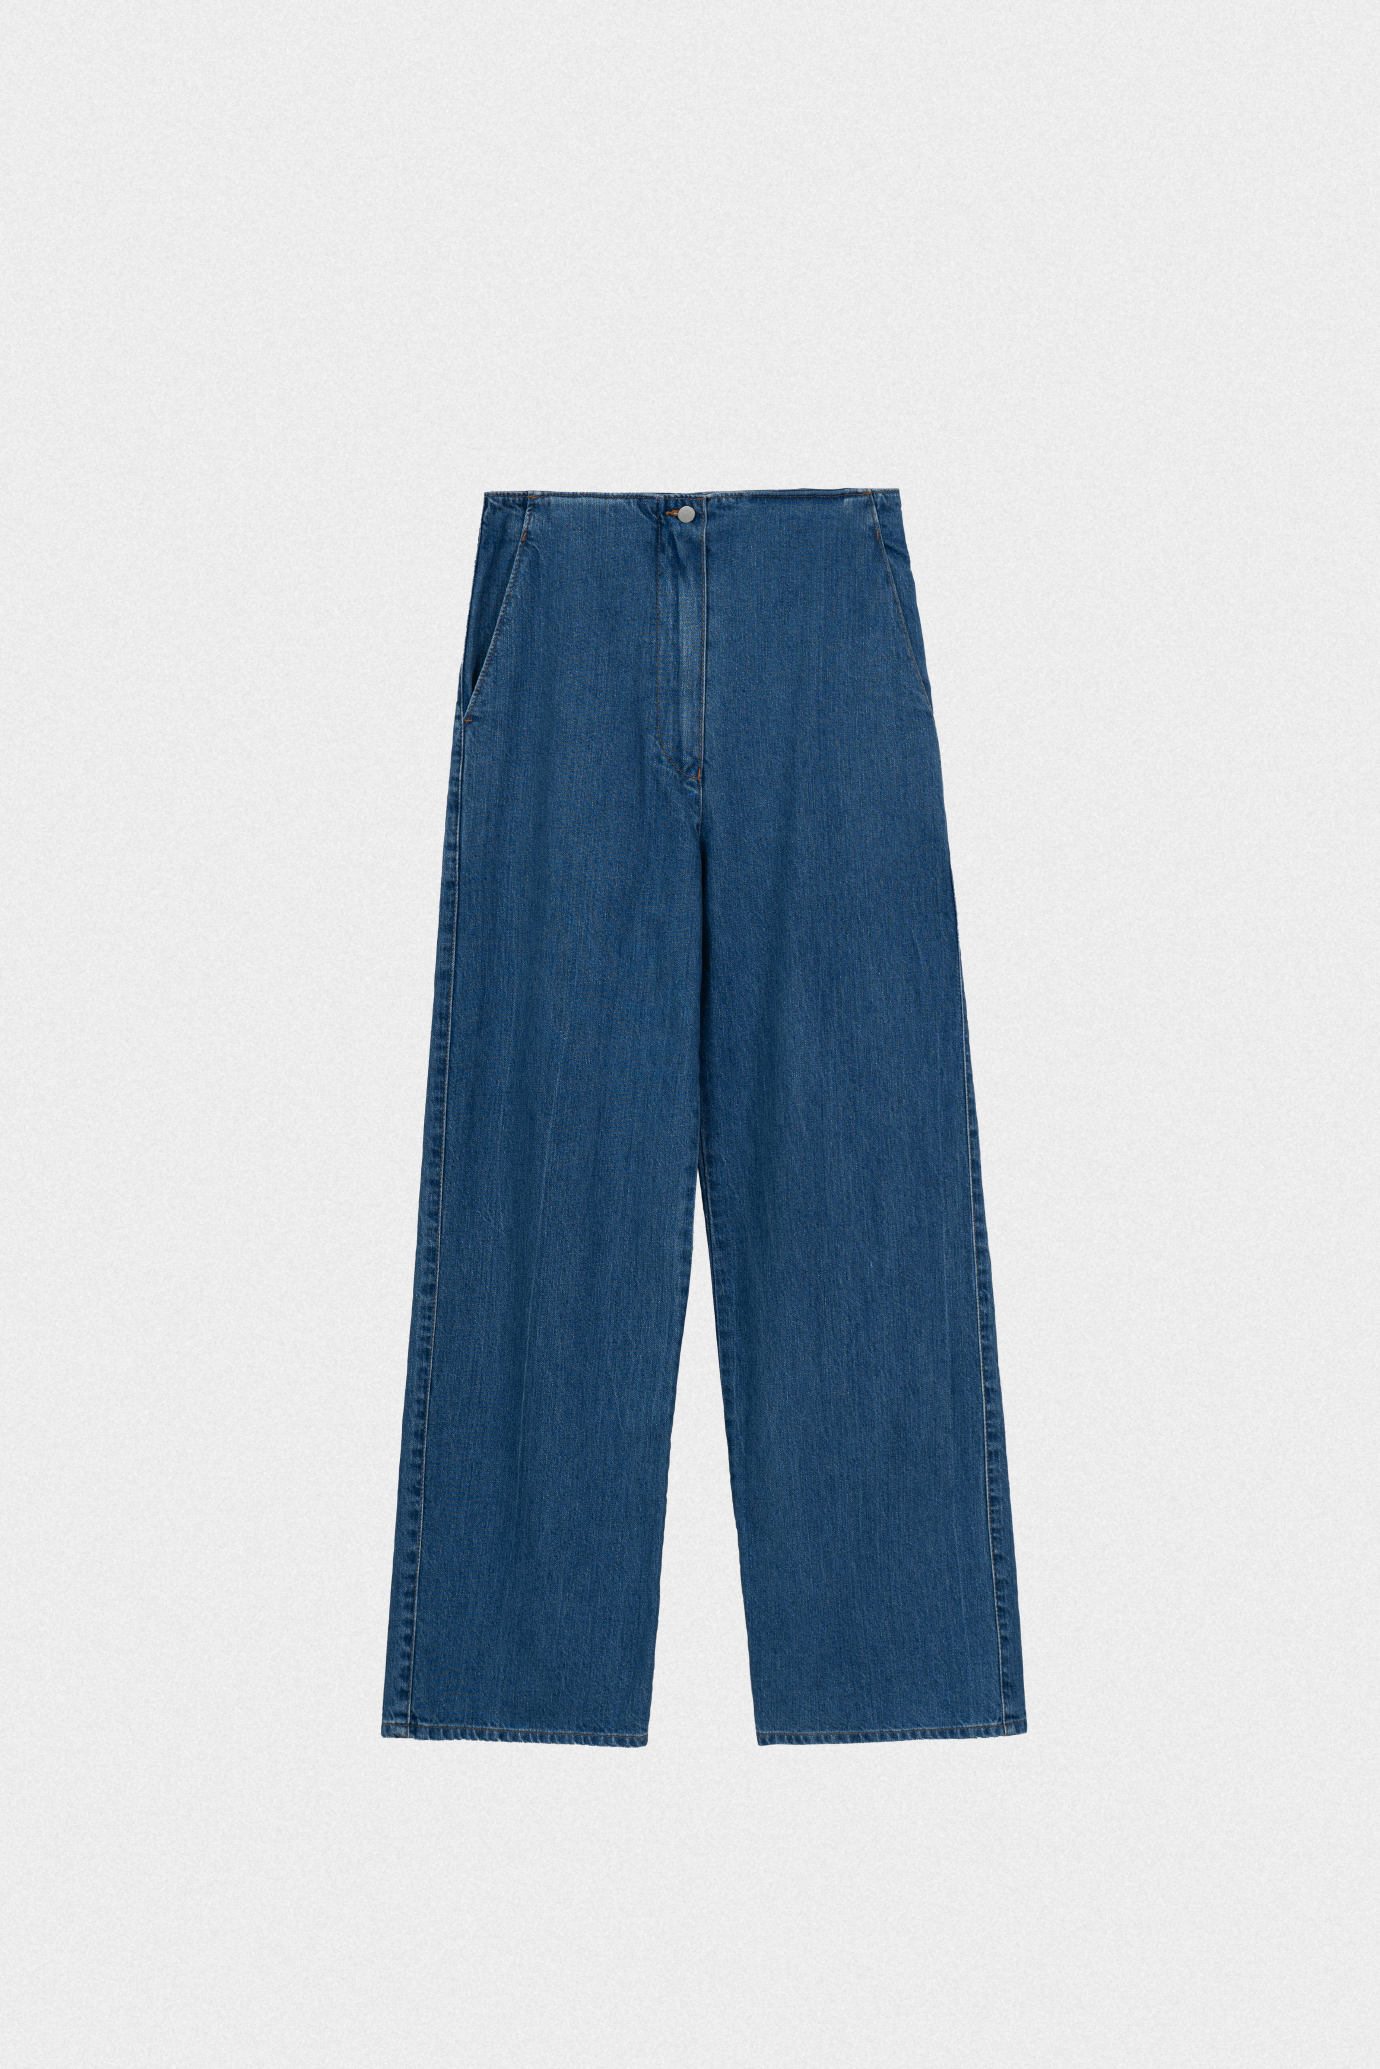 26882_90s Jeans